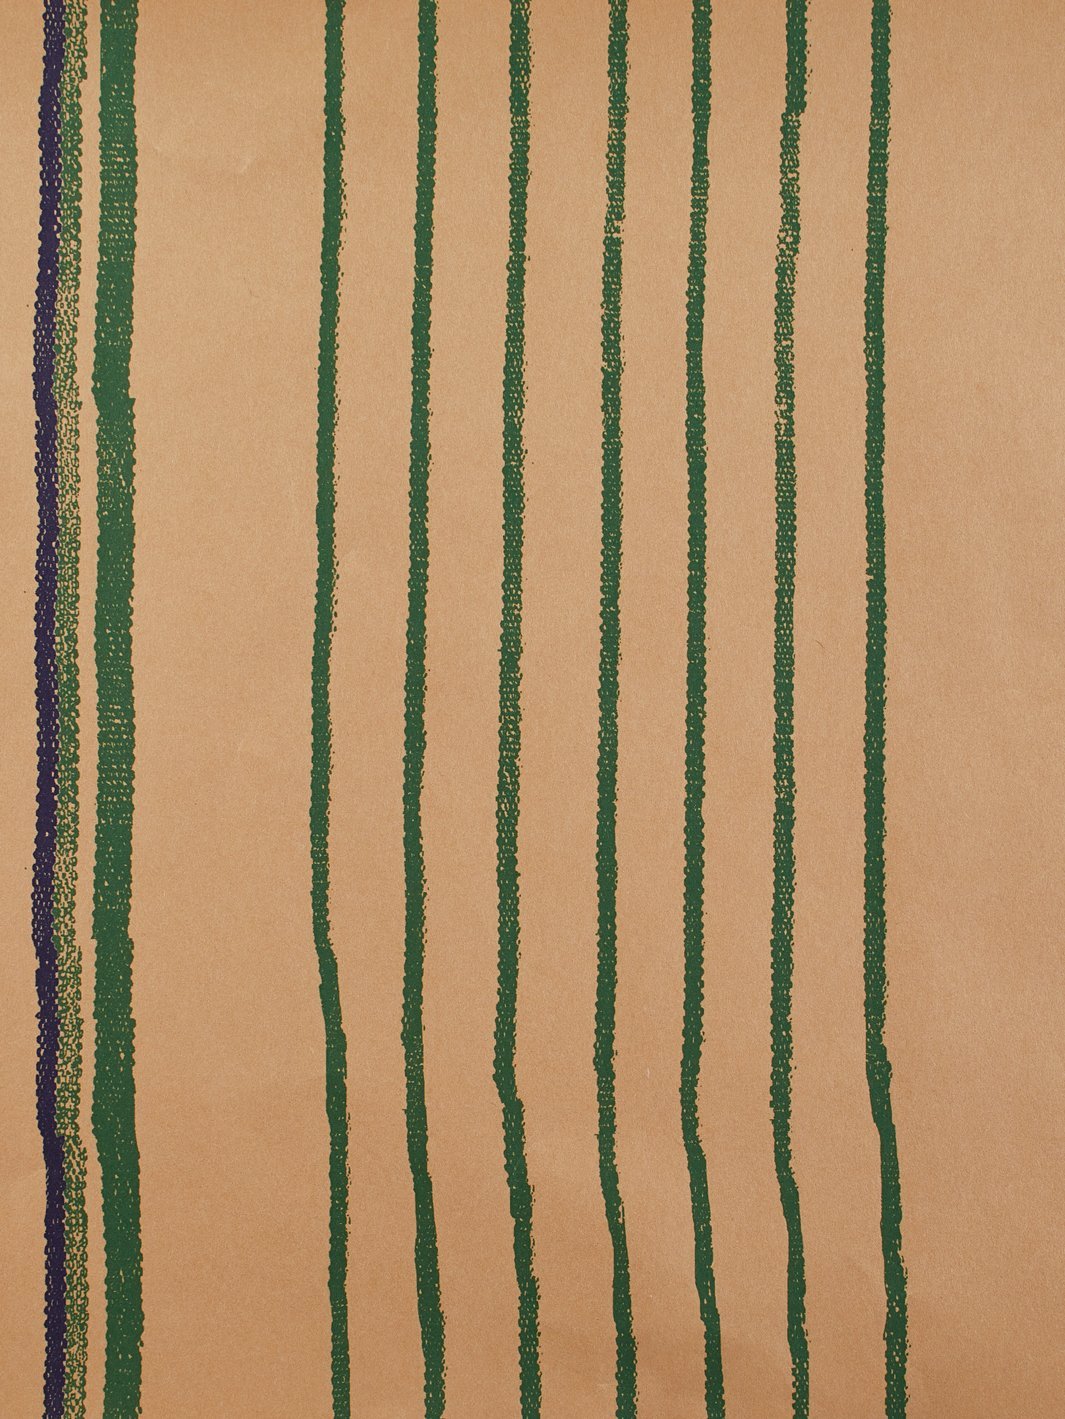 'Two Tone Stripe' Kraft' Wallpaper by Nathan Turner - Green and Blue